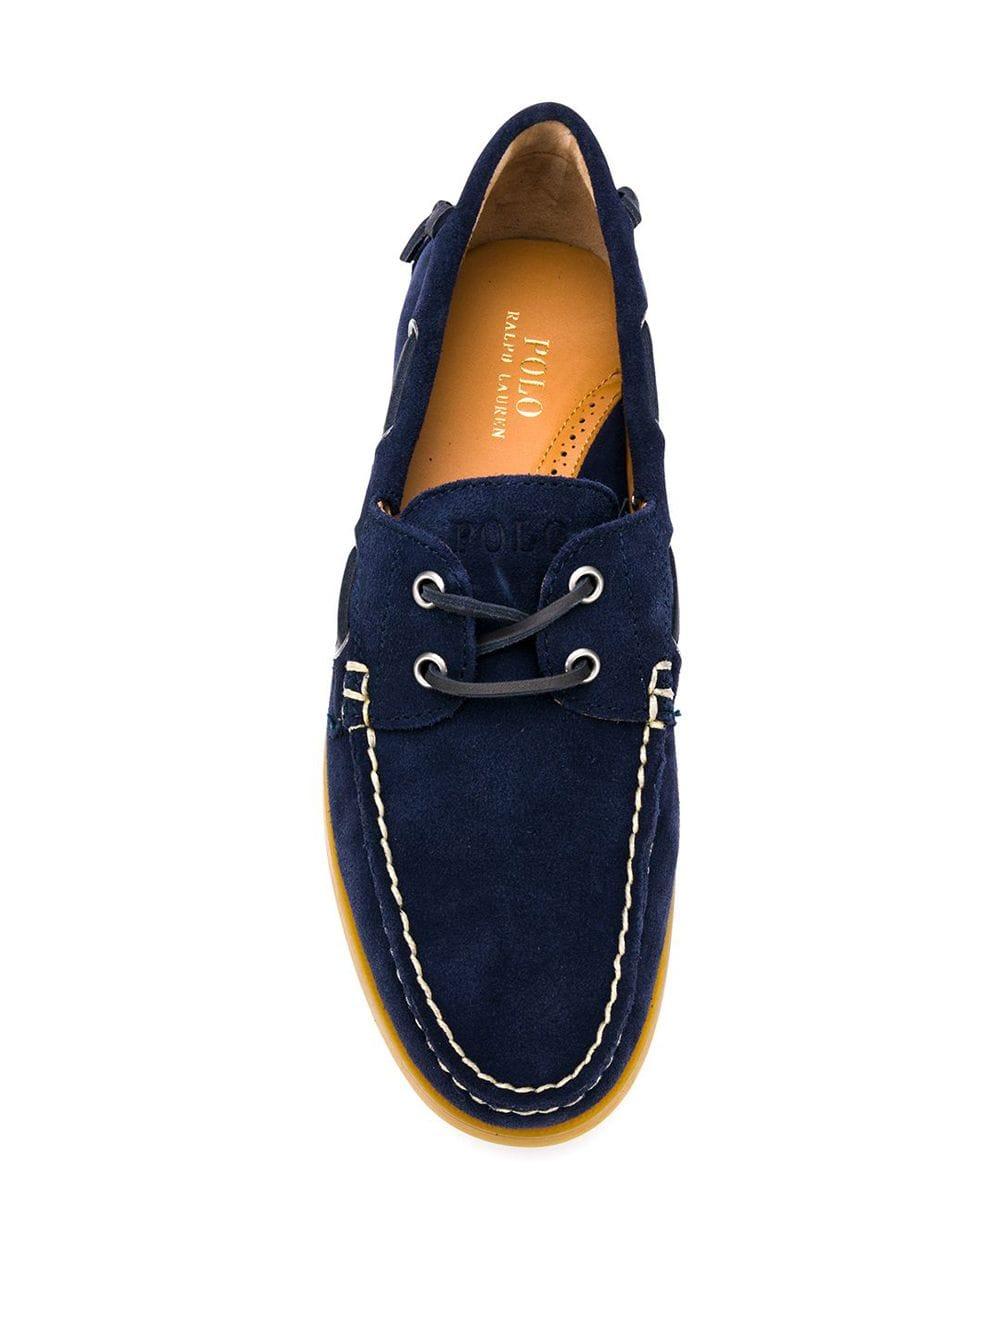 Polo Ralph Lauren Leather Merton Loafers in Blue for Men - Lyst